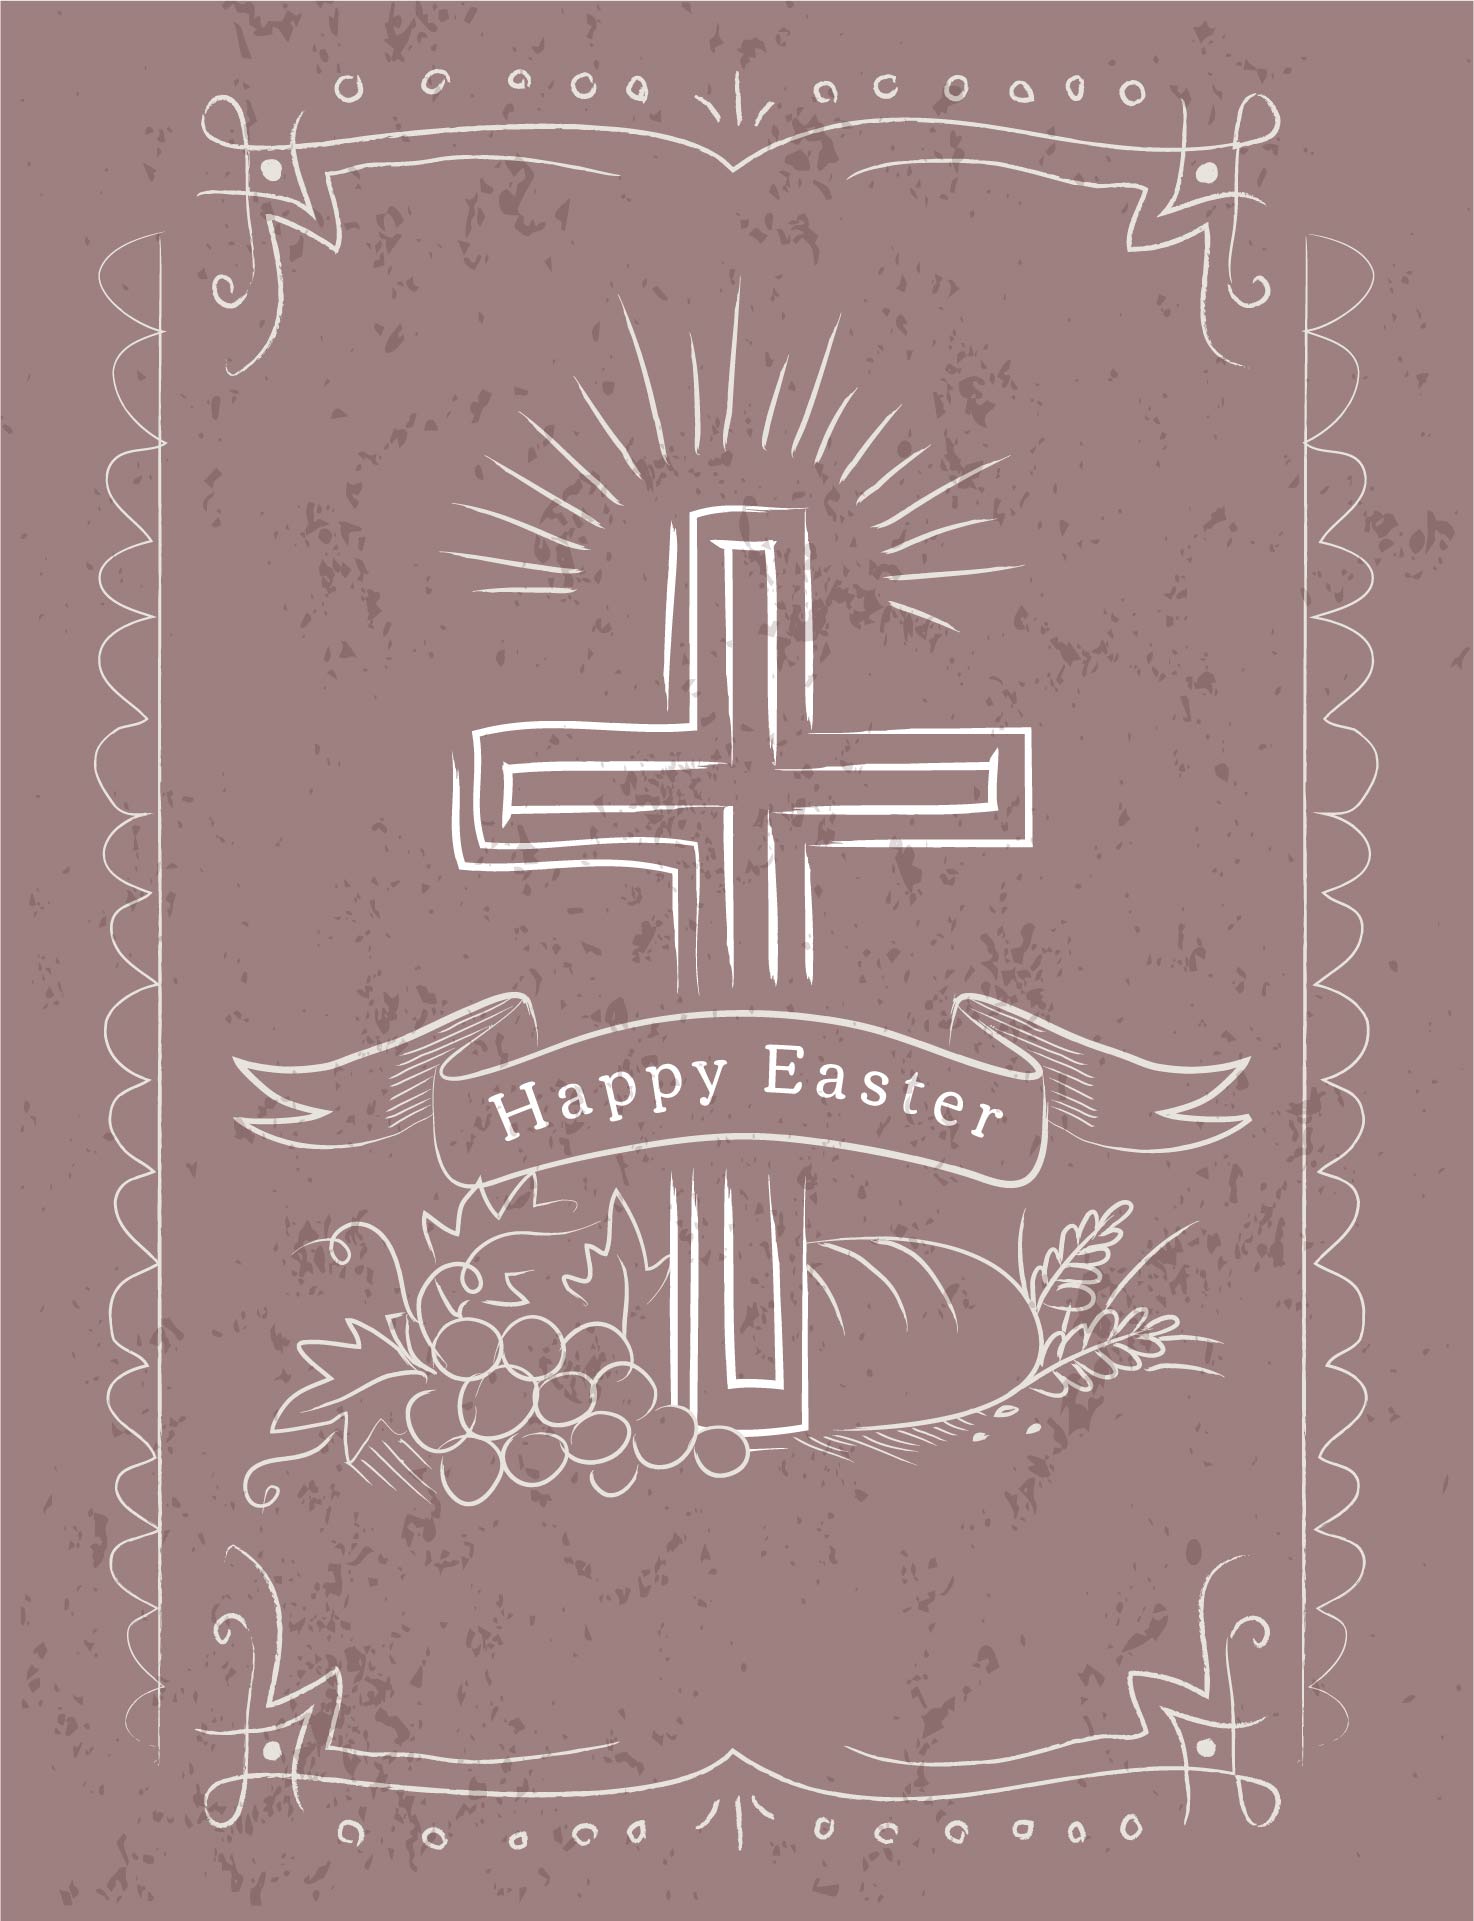 religious-easter-stickers-he-is-risen-with-etsy